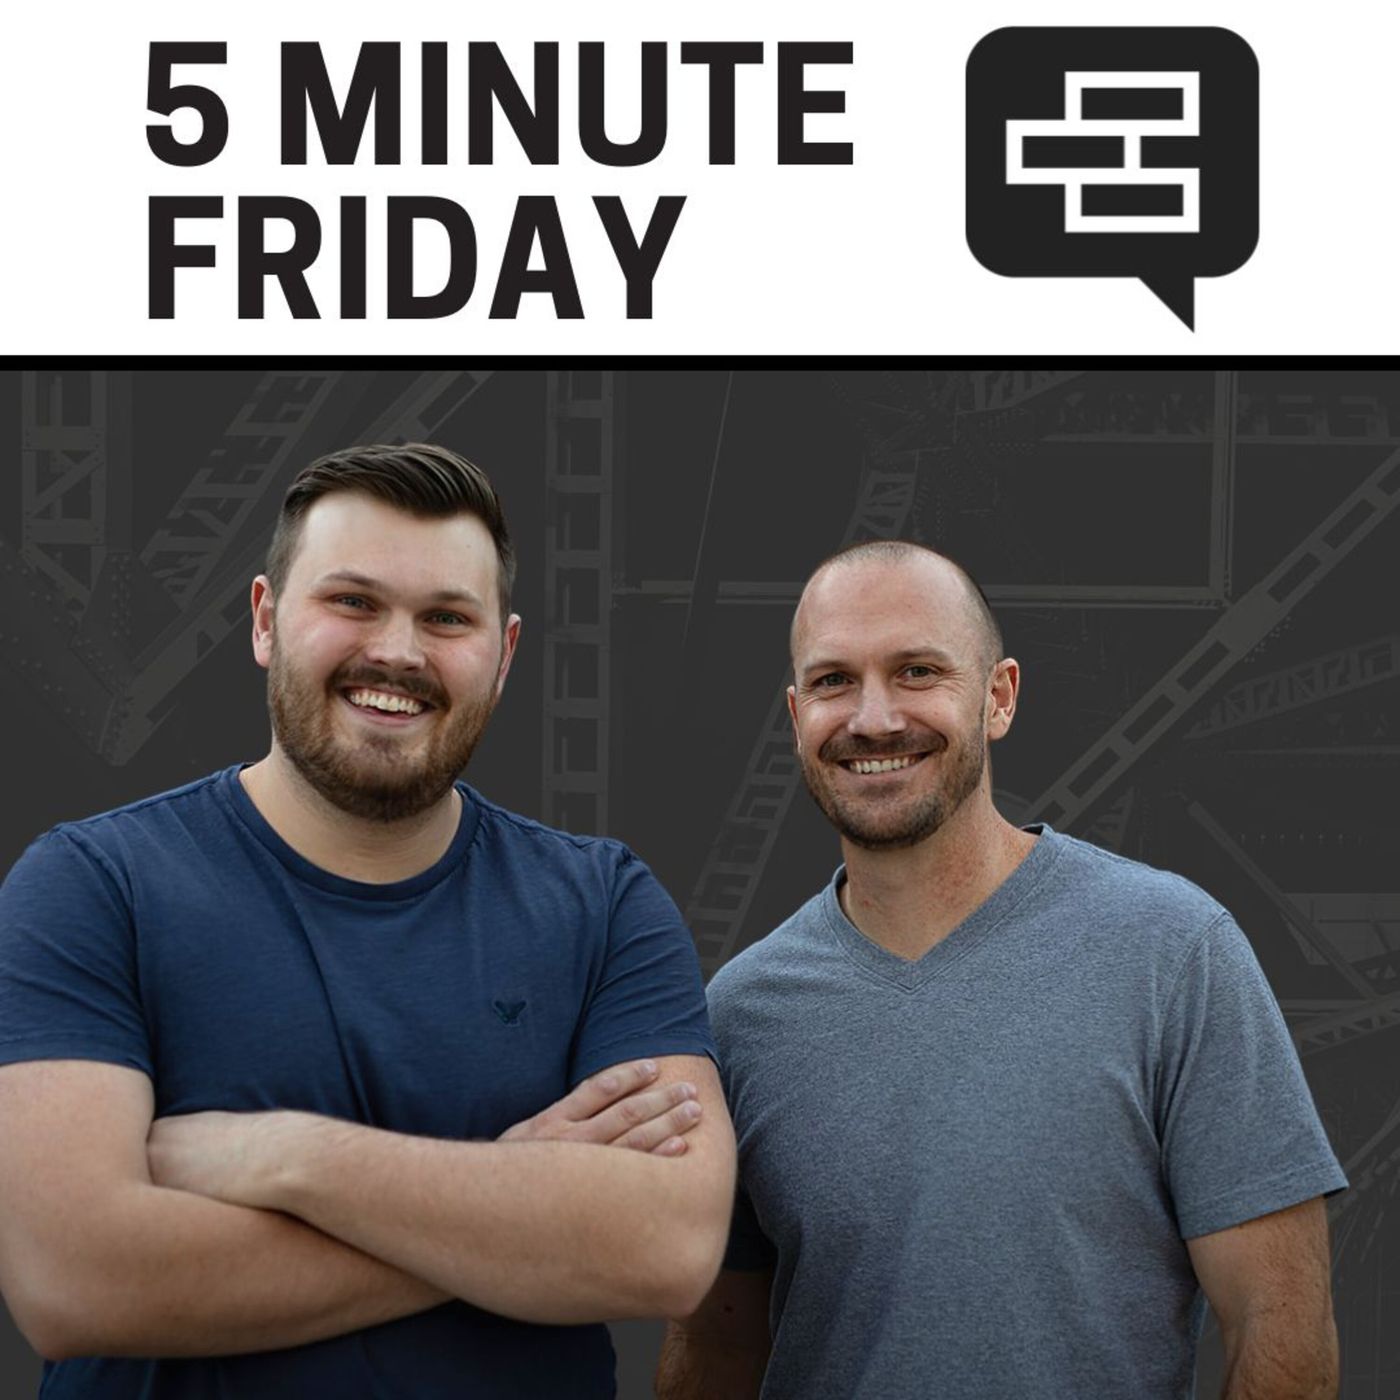 No. | 5 Minute Friday - The most powerful word in construction… (no)